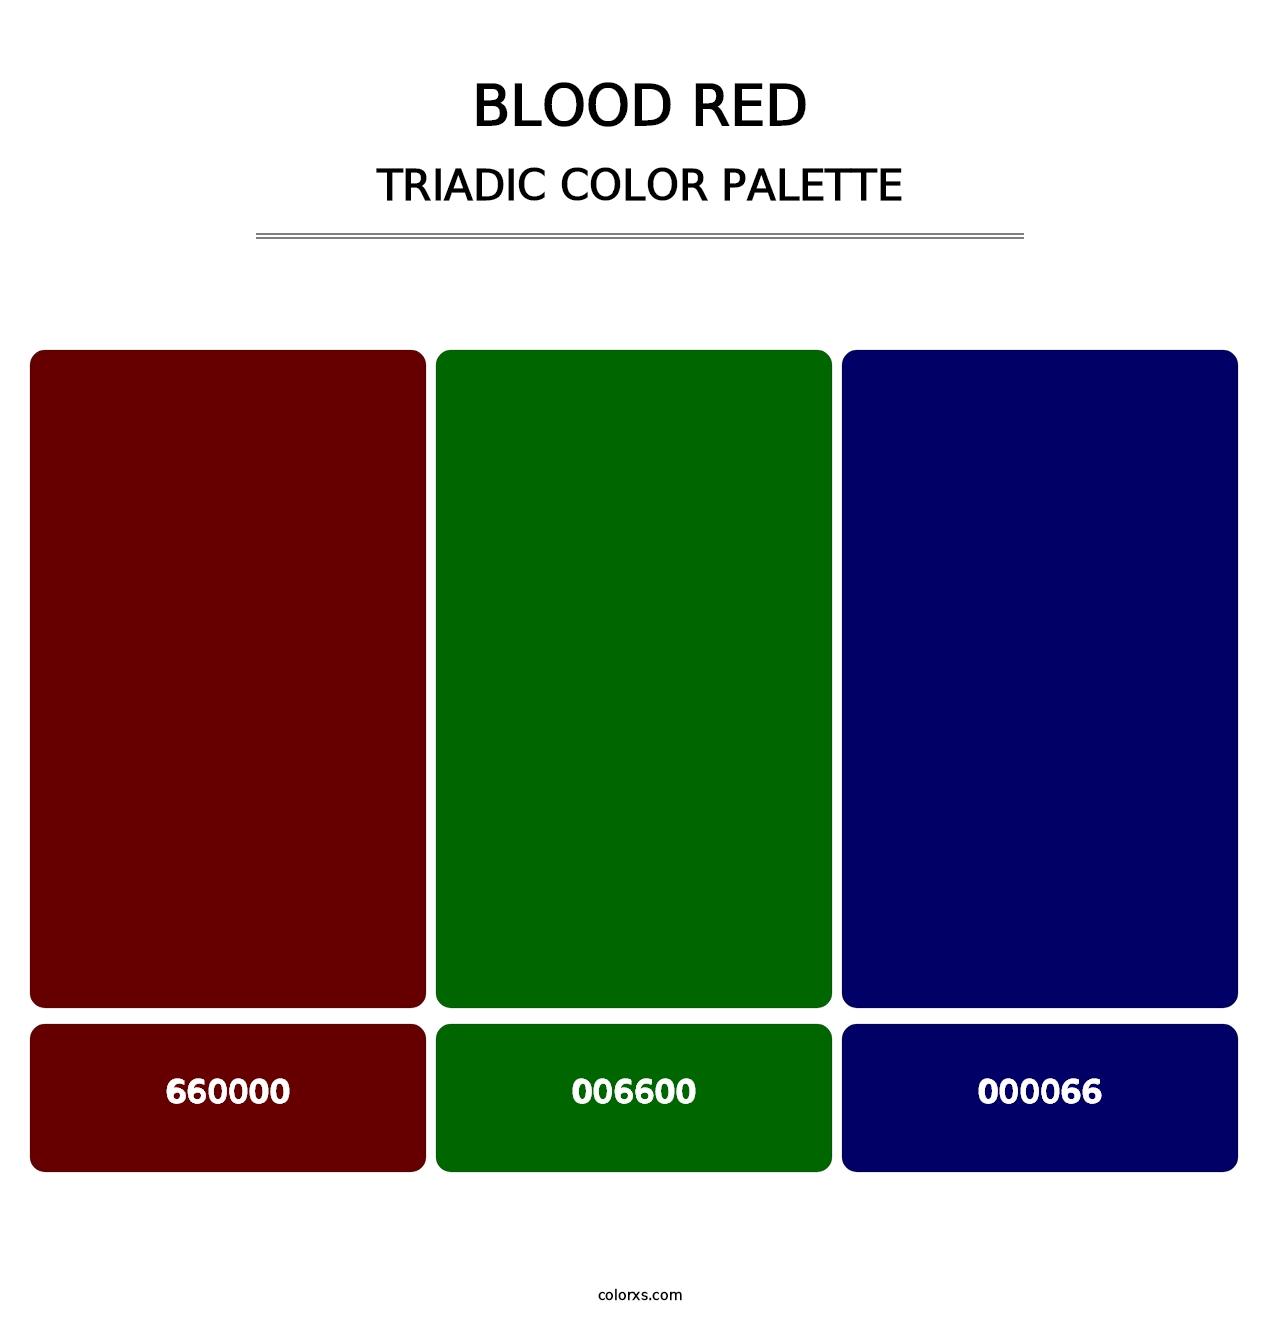 Blood Red - Triadic Color Palette